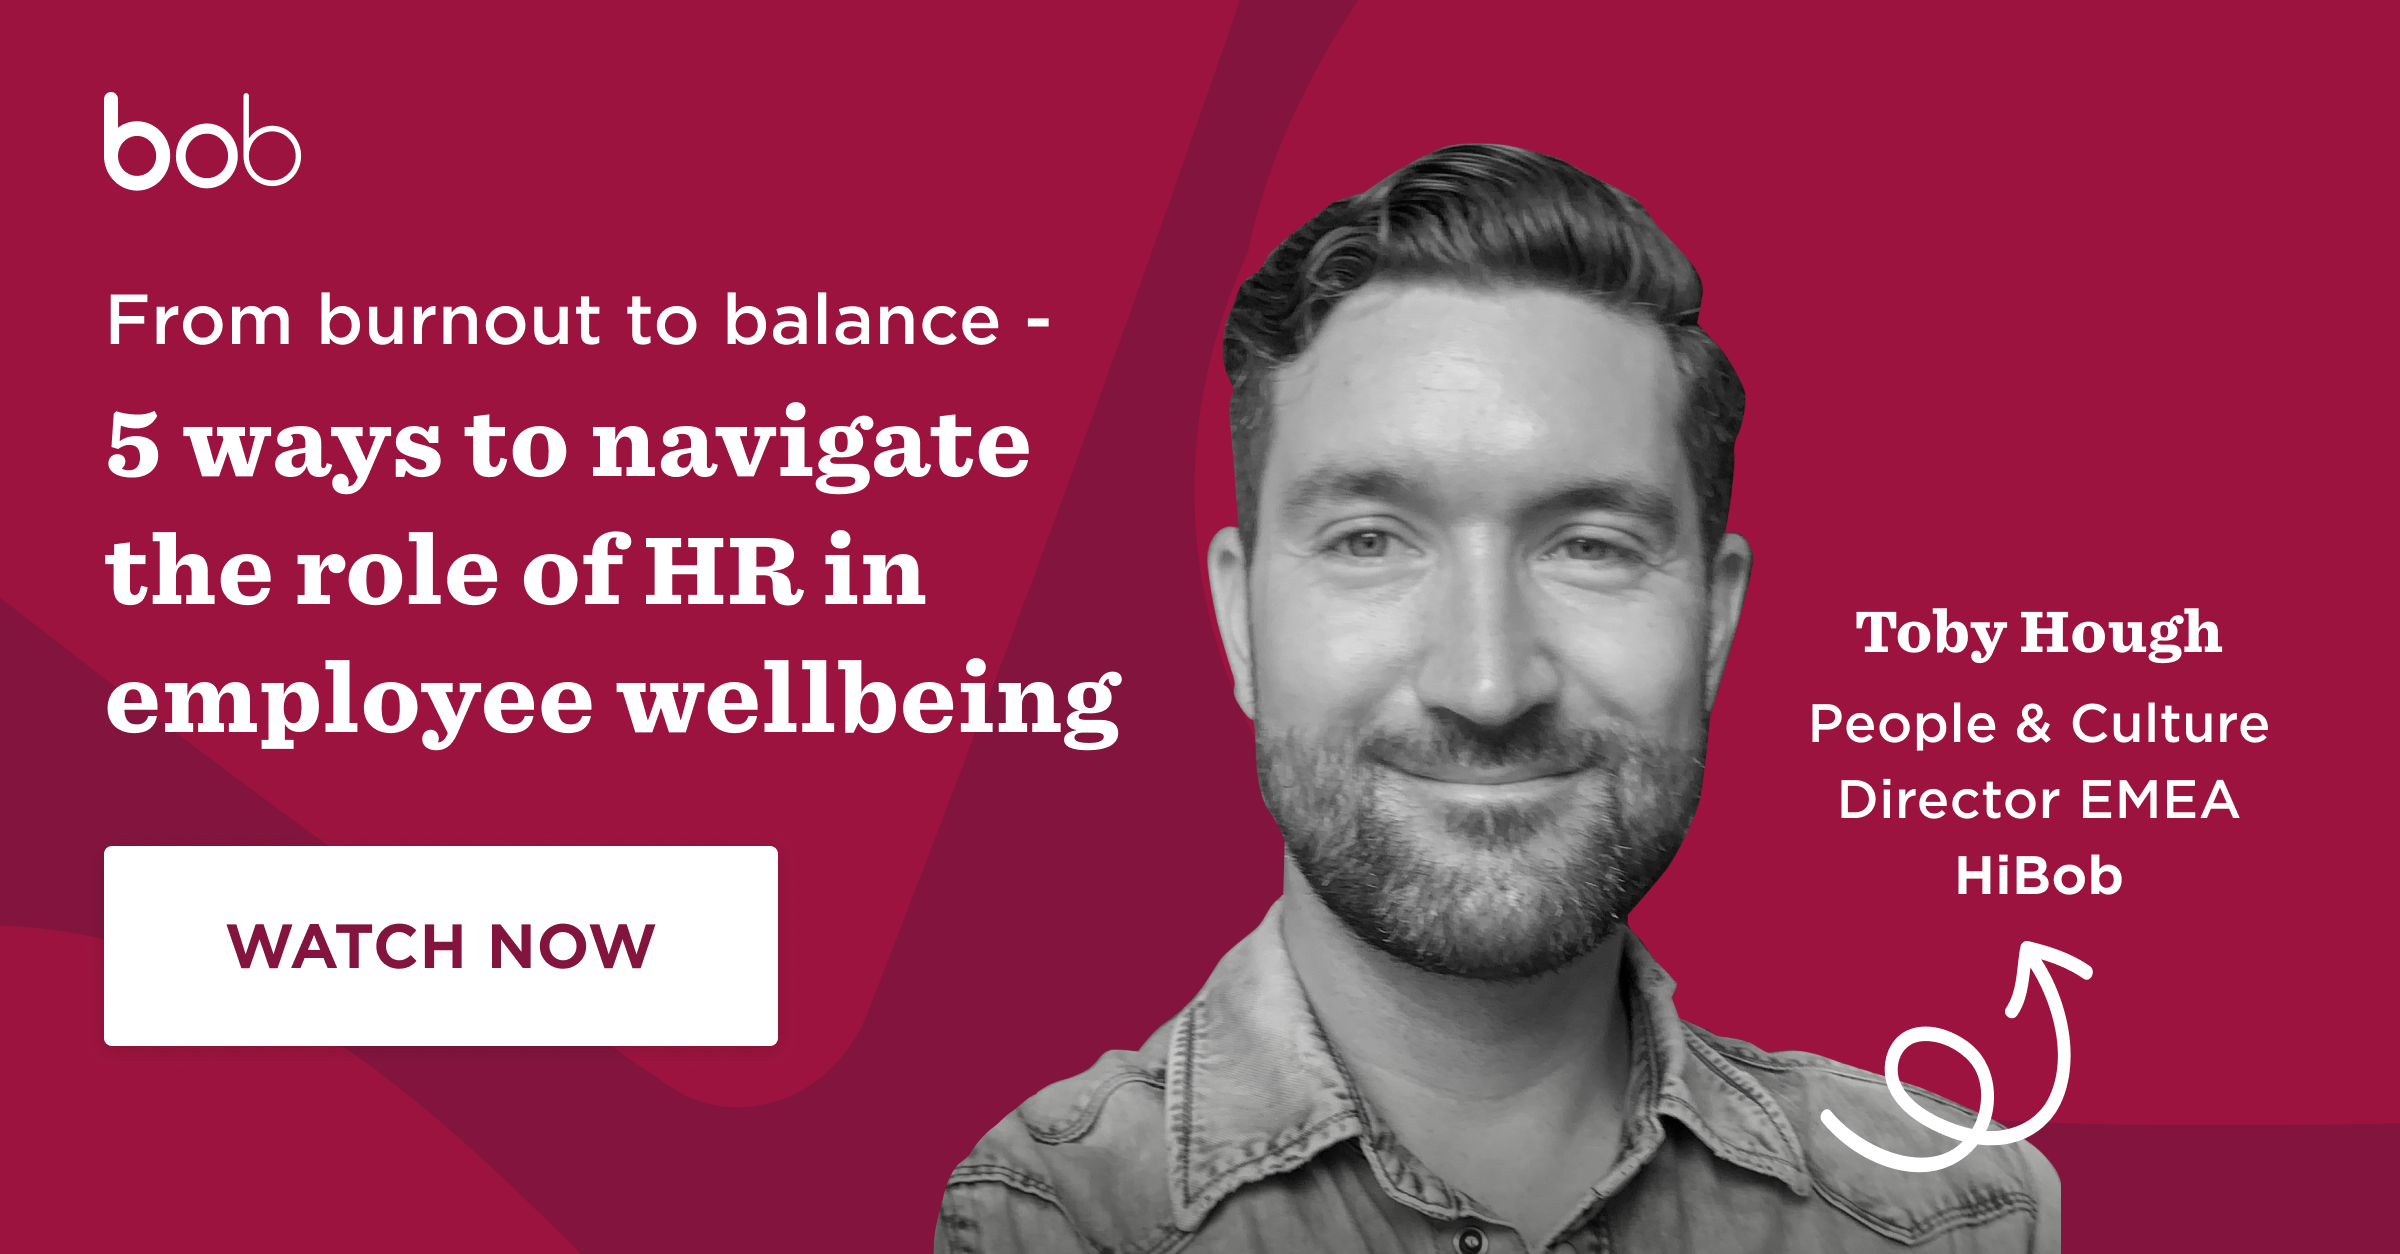 Tackling HR Burnout – Strategies for HR & Employee Wellbeing - CIPD-Wellbeing-at-Work_thought-leadership-LinkedIn-ads_1200-banner-1.png